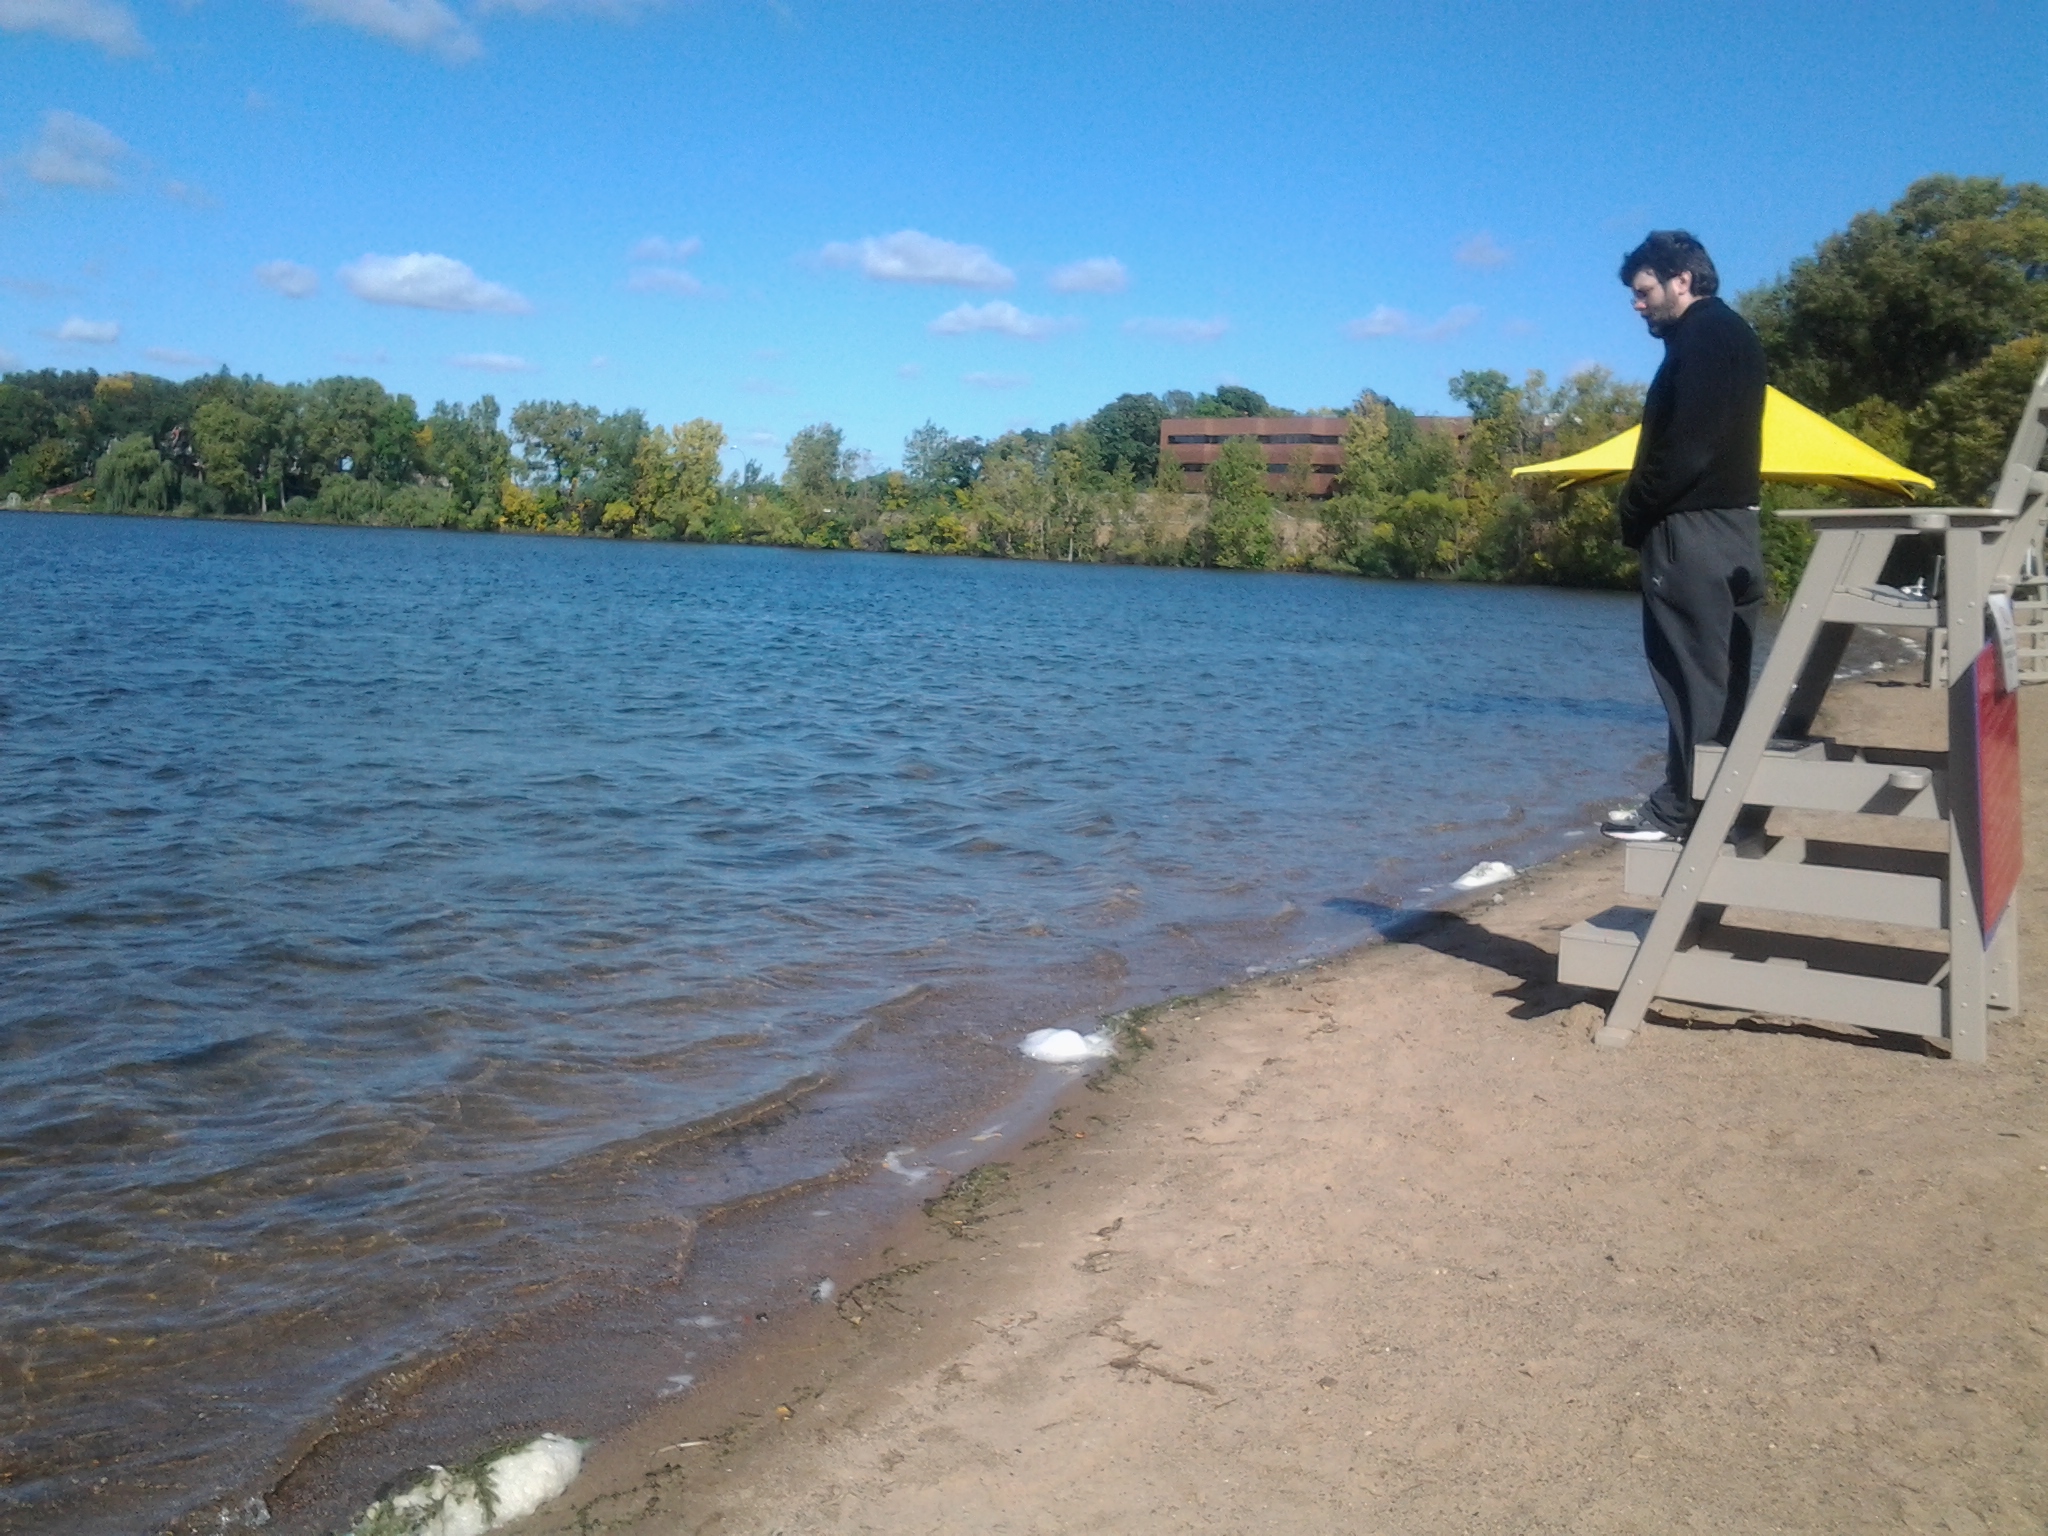 the man is standing on the edge of a lake while holding his board